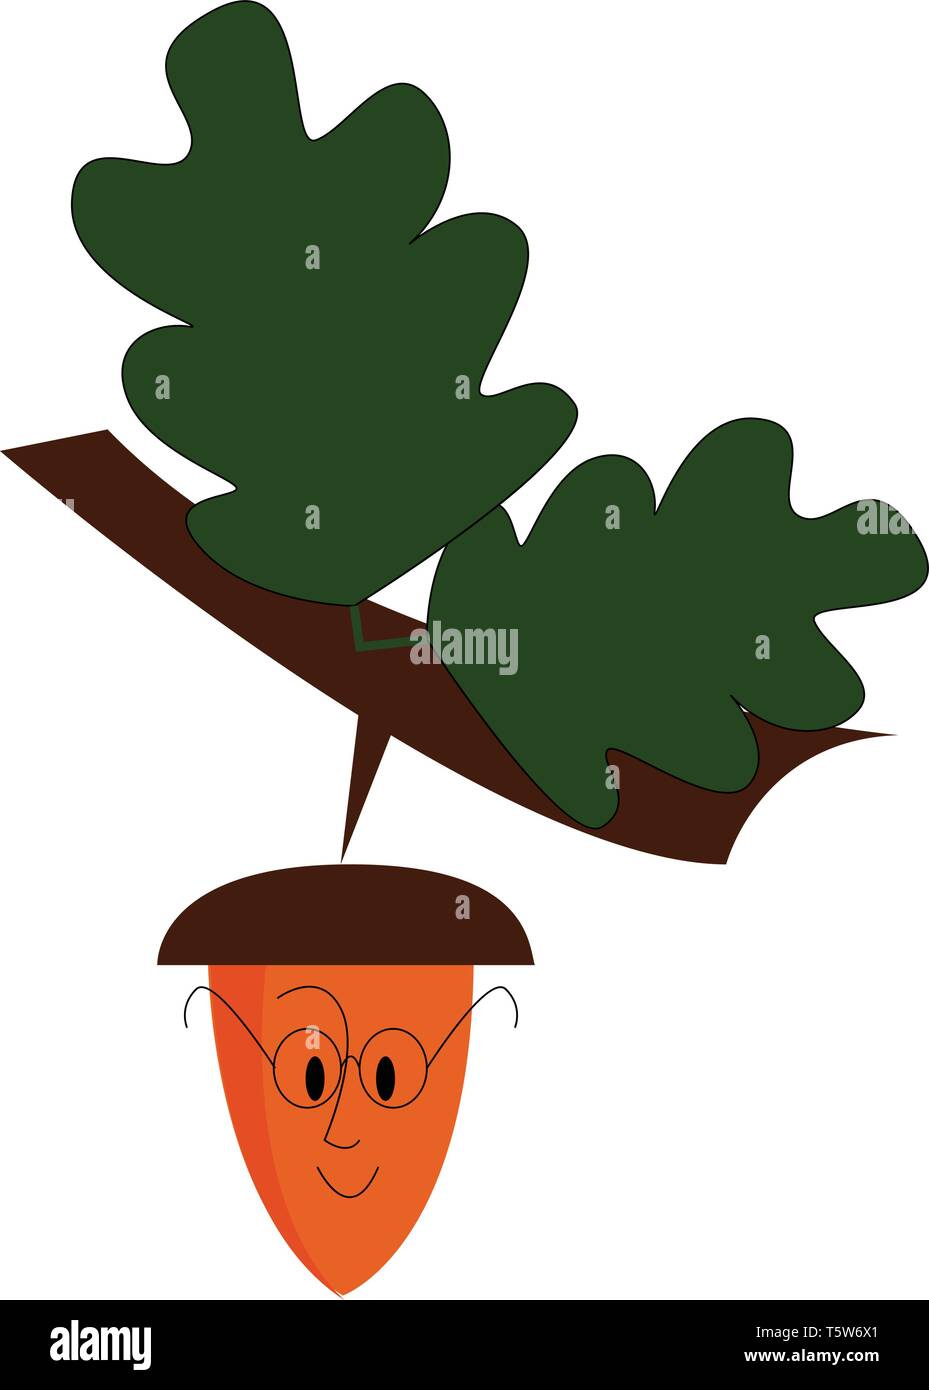 An acorn hanging from a brown branch with two green leaves has two eyes a nose a mouth and is wearing glasses vector color drawing or illustration Stock Vector